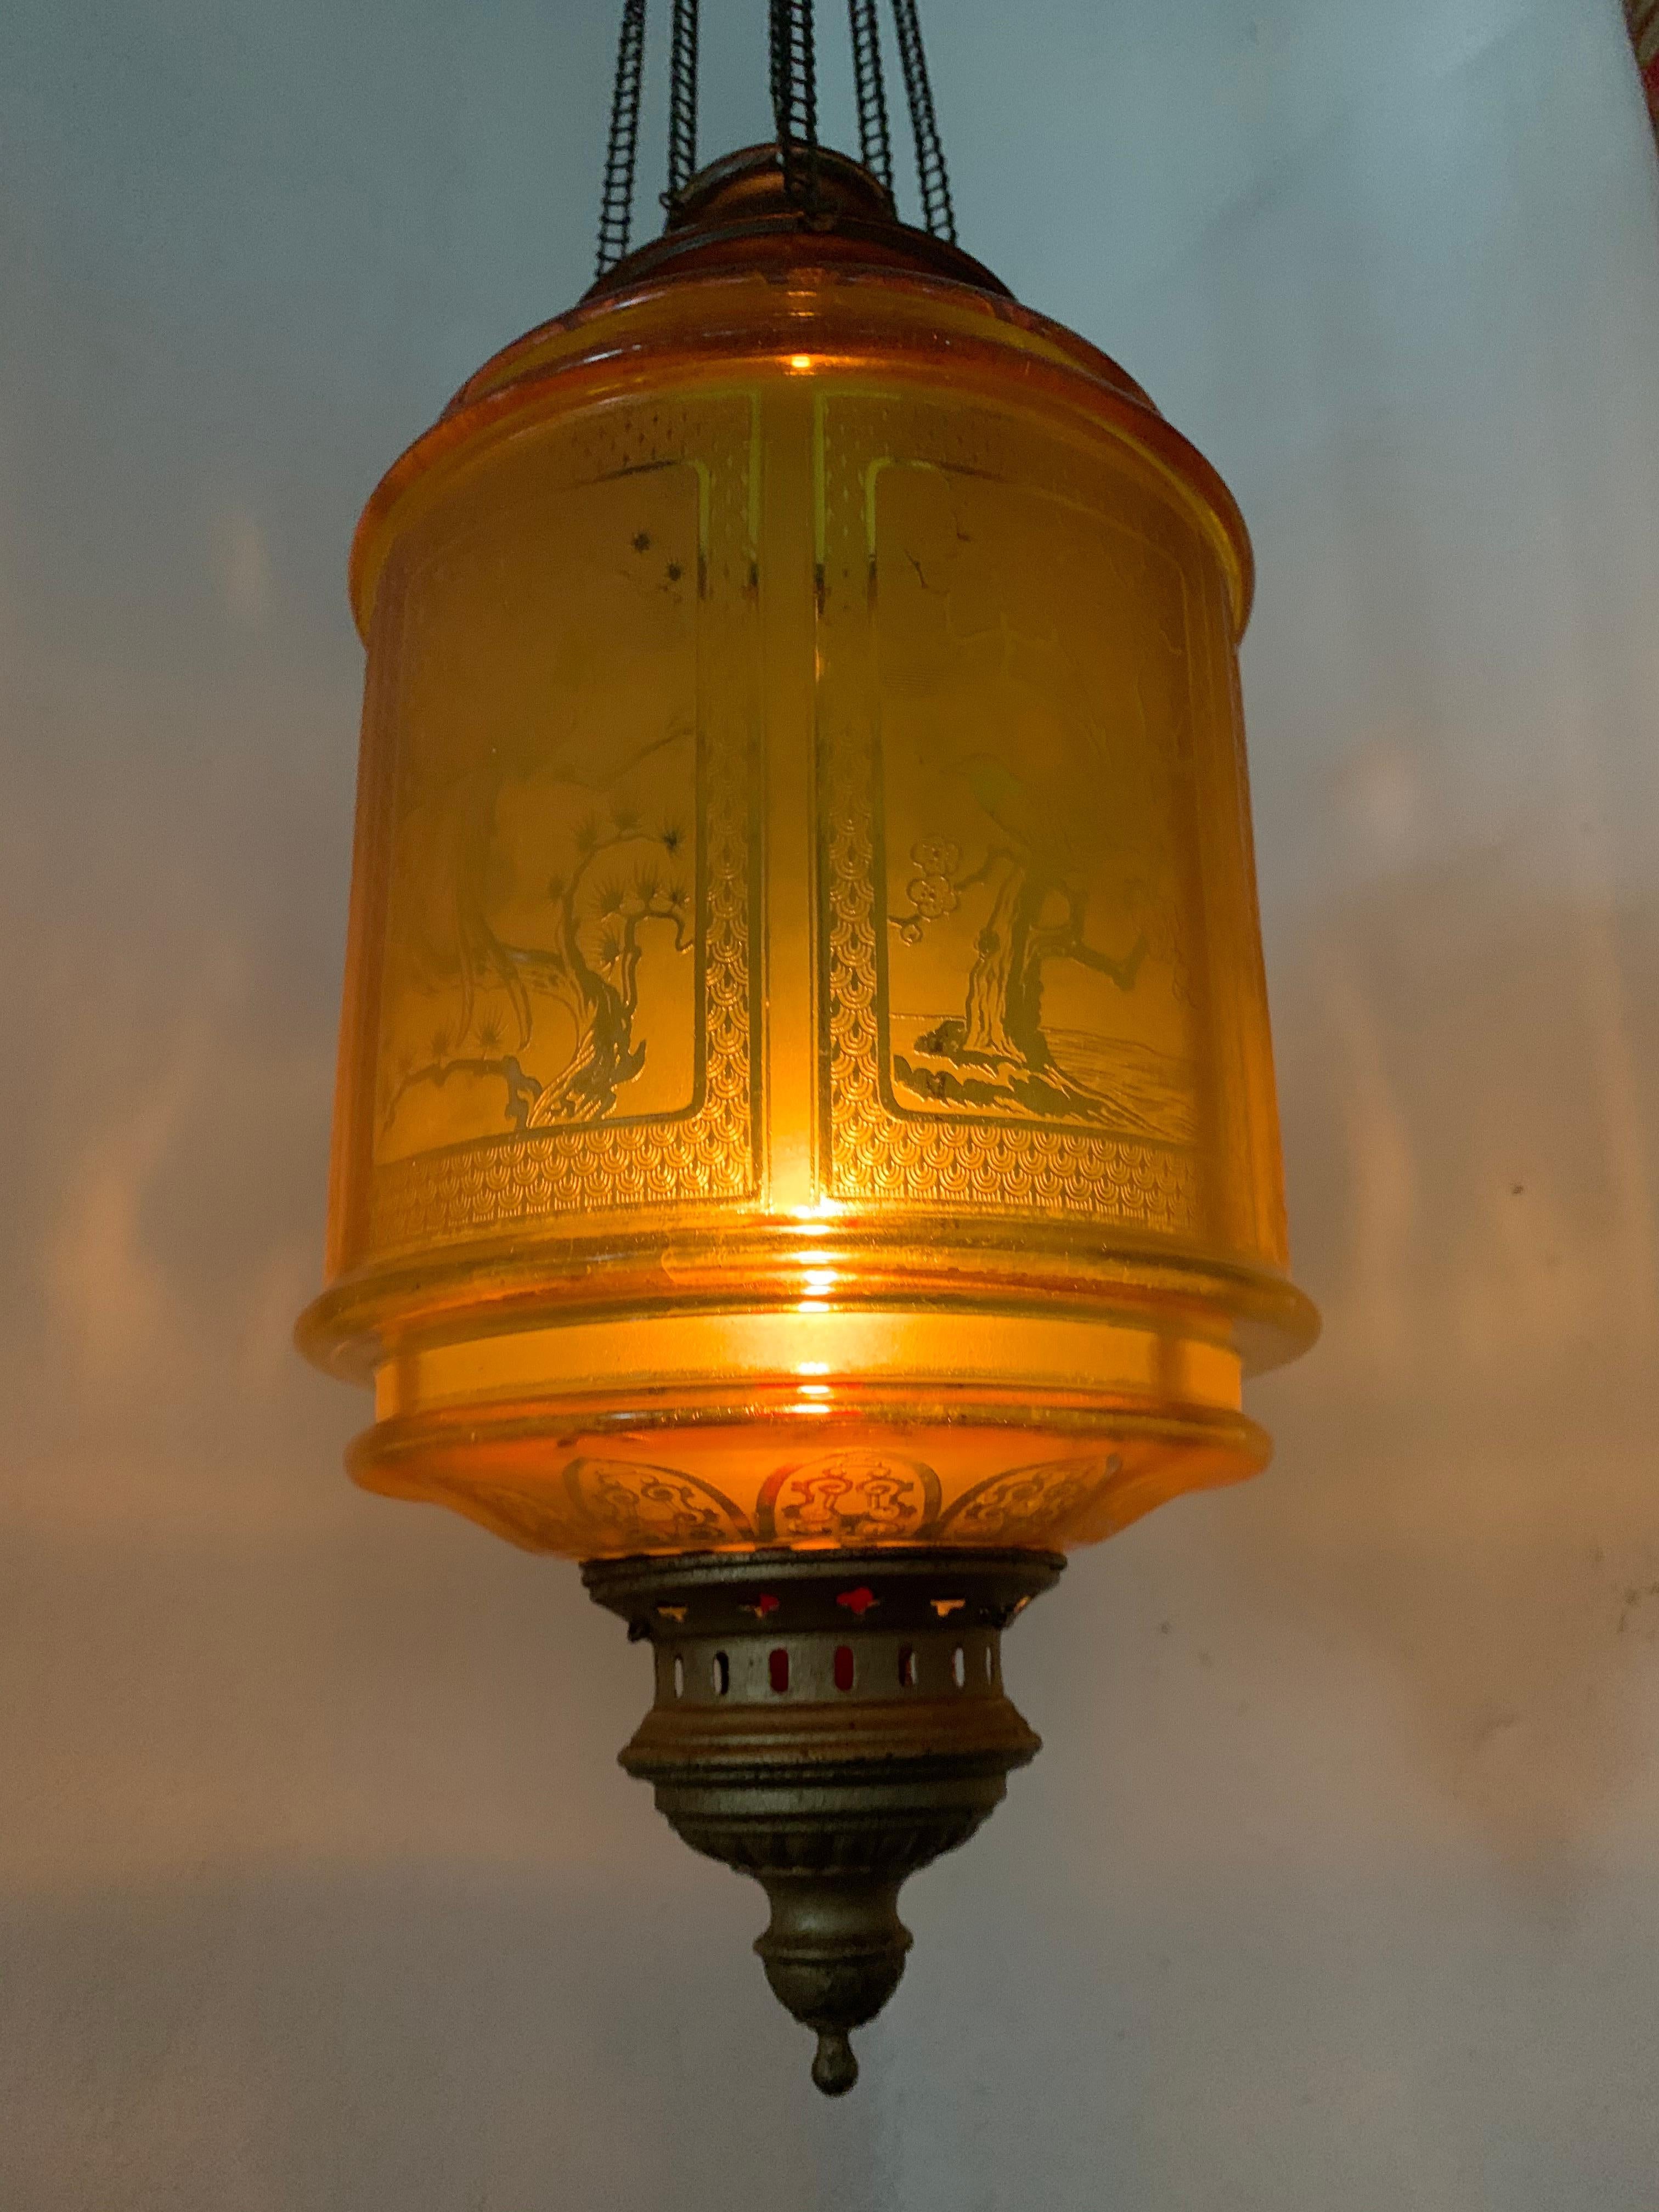 French Amber Art Nouveau Candle Lantern by Baccarat France, Depicting Birds, circa 1890 For Sale